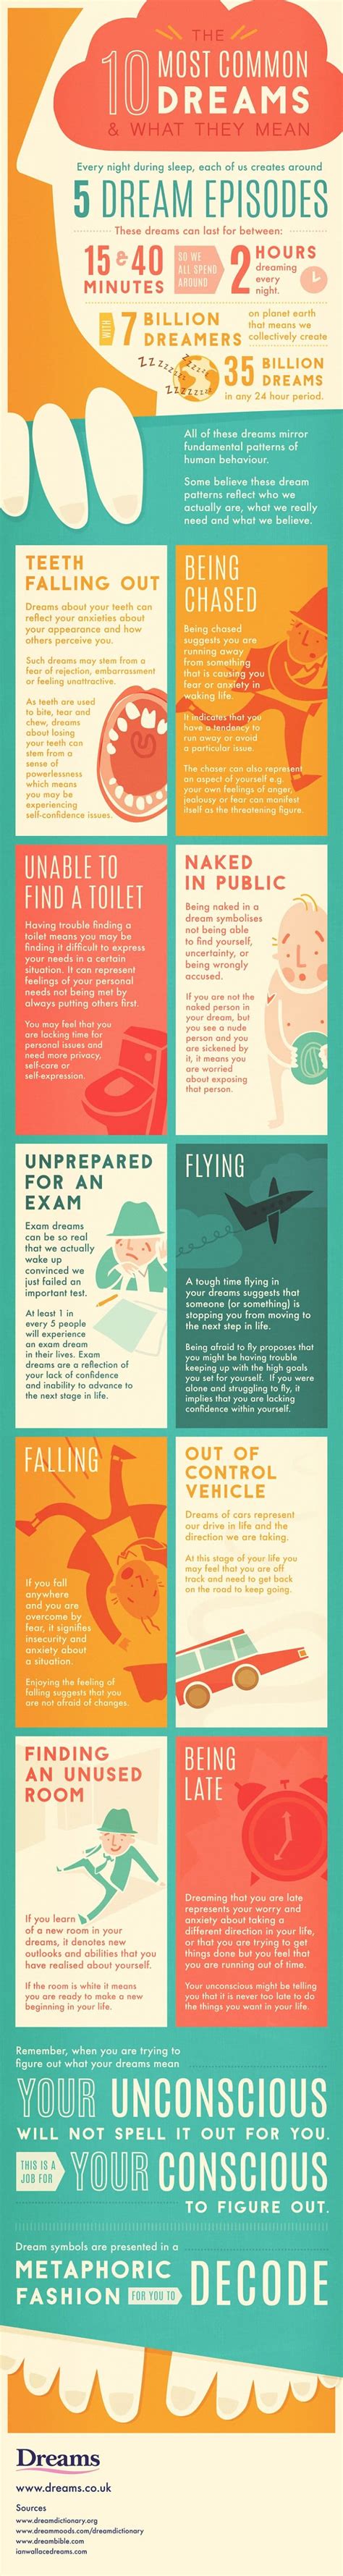 10 Of The Most Common Dreams And Their Meanings